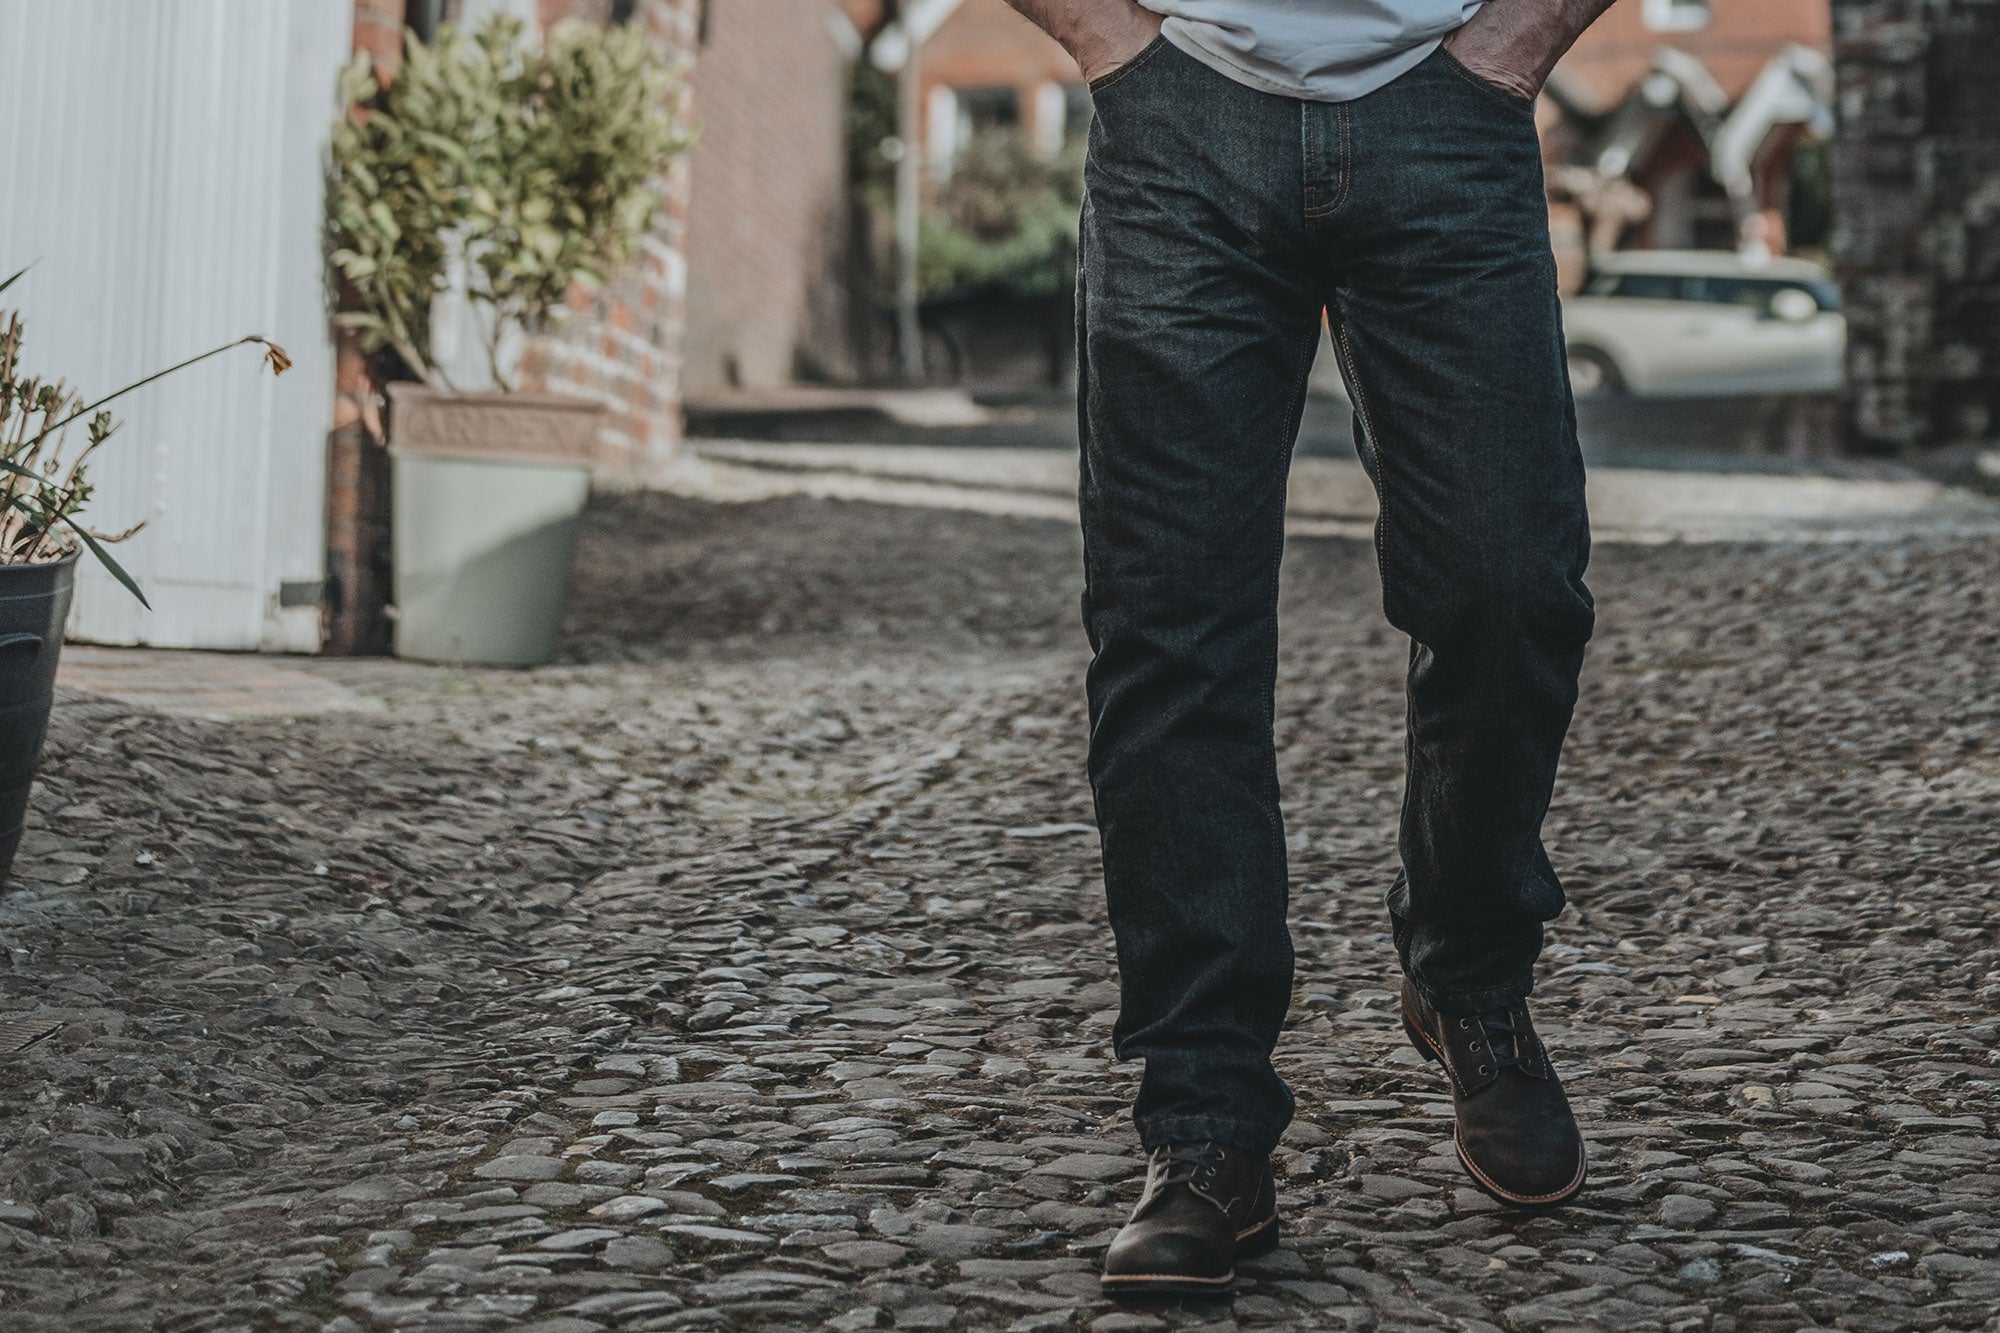 Easyrider motorcycle jeans for men – they do what they say on the tin!